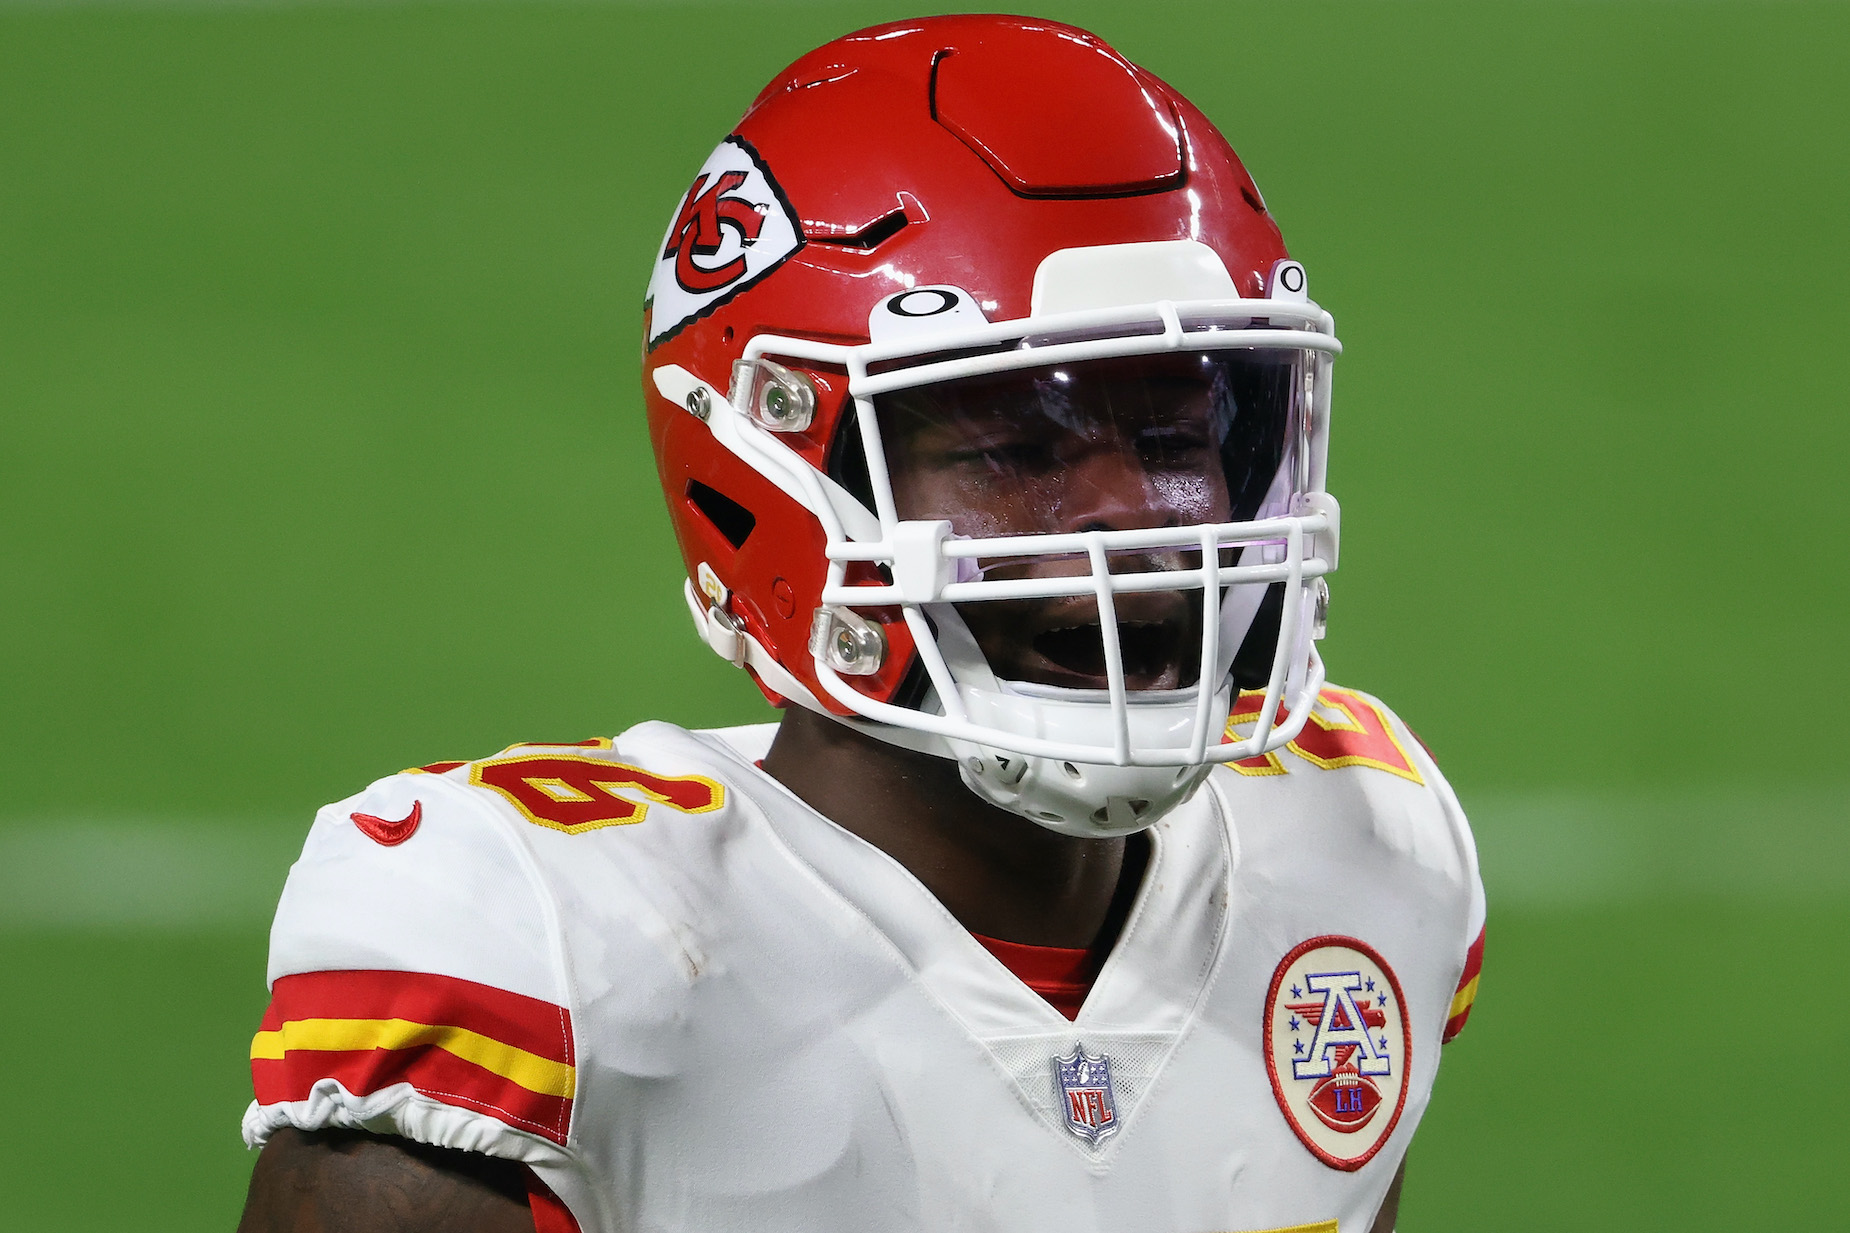 Running back Le'Veon Bell during his one season on Andy Reid's Kansas City Chiefs team.